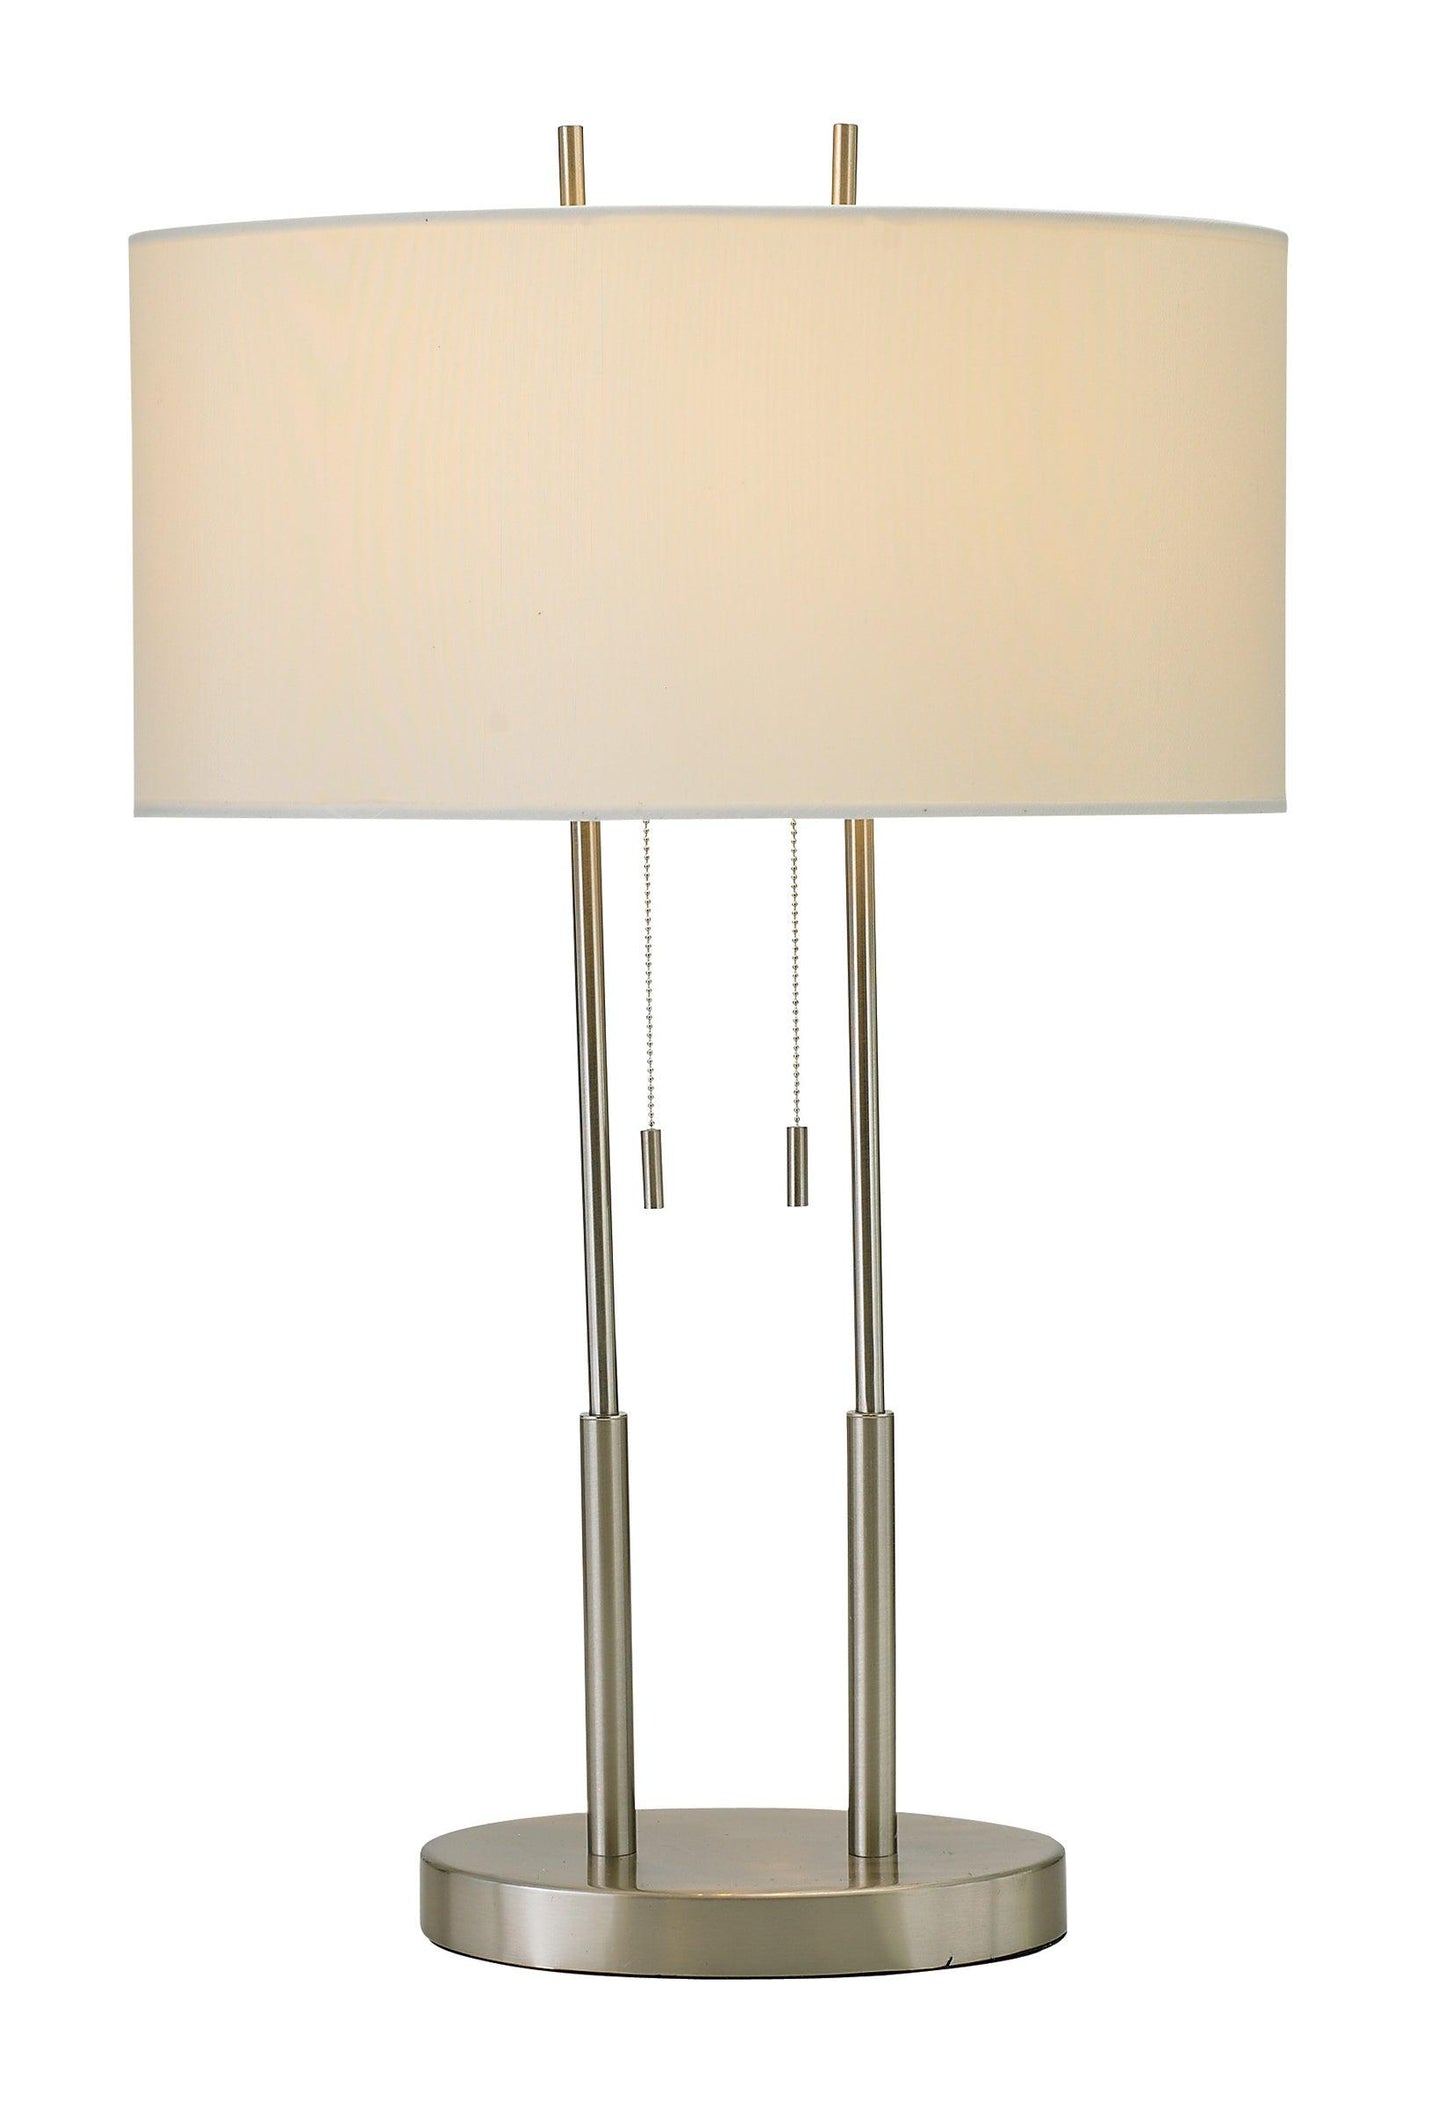 Brushed Steel Dual Pole Metal Table Lamp - AFS